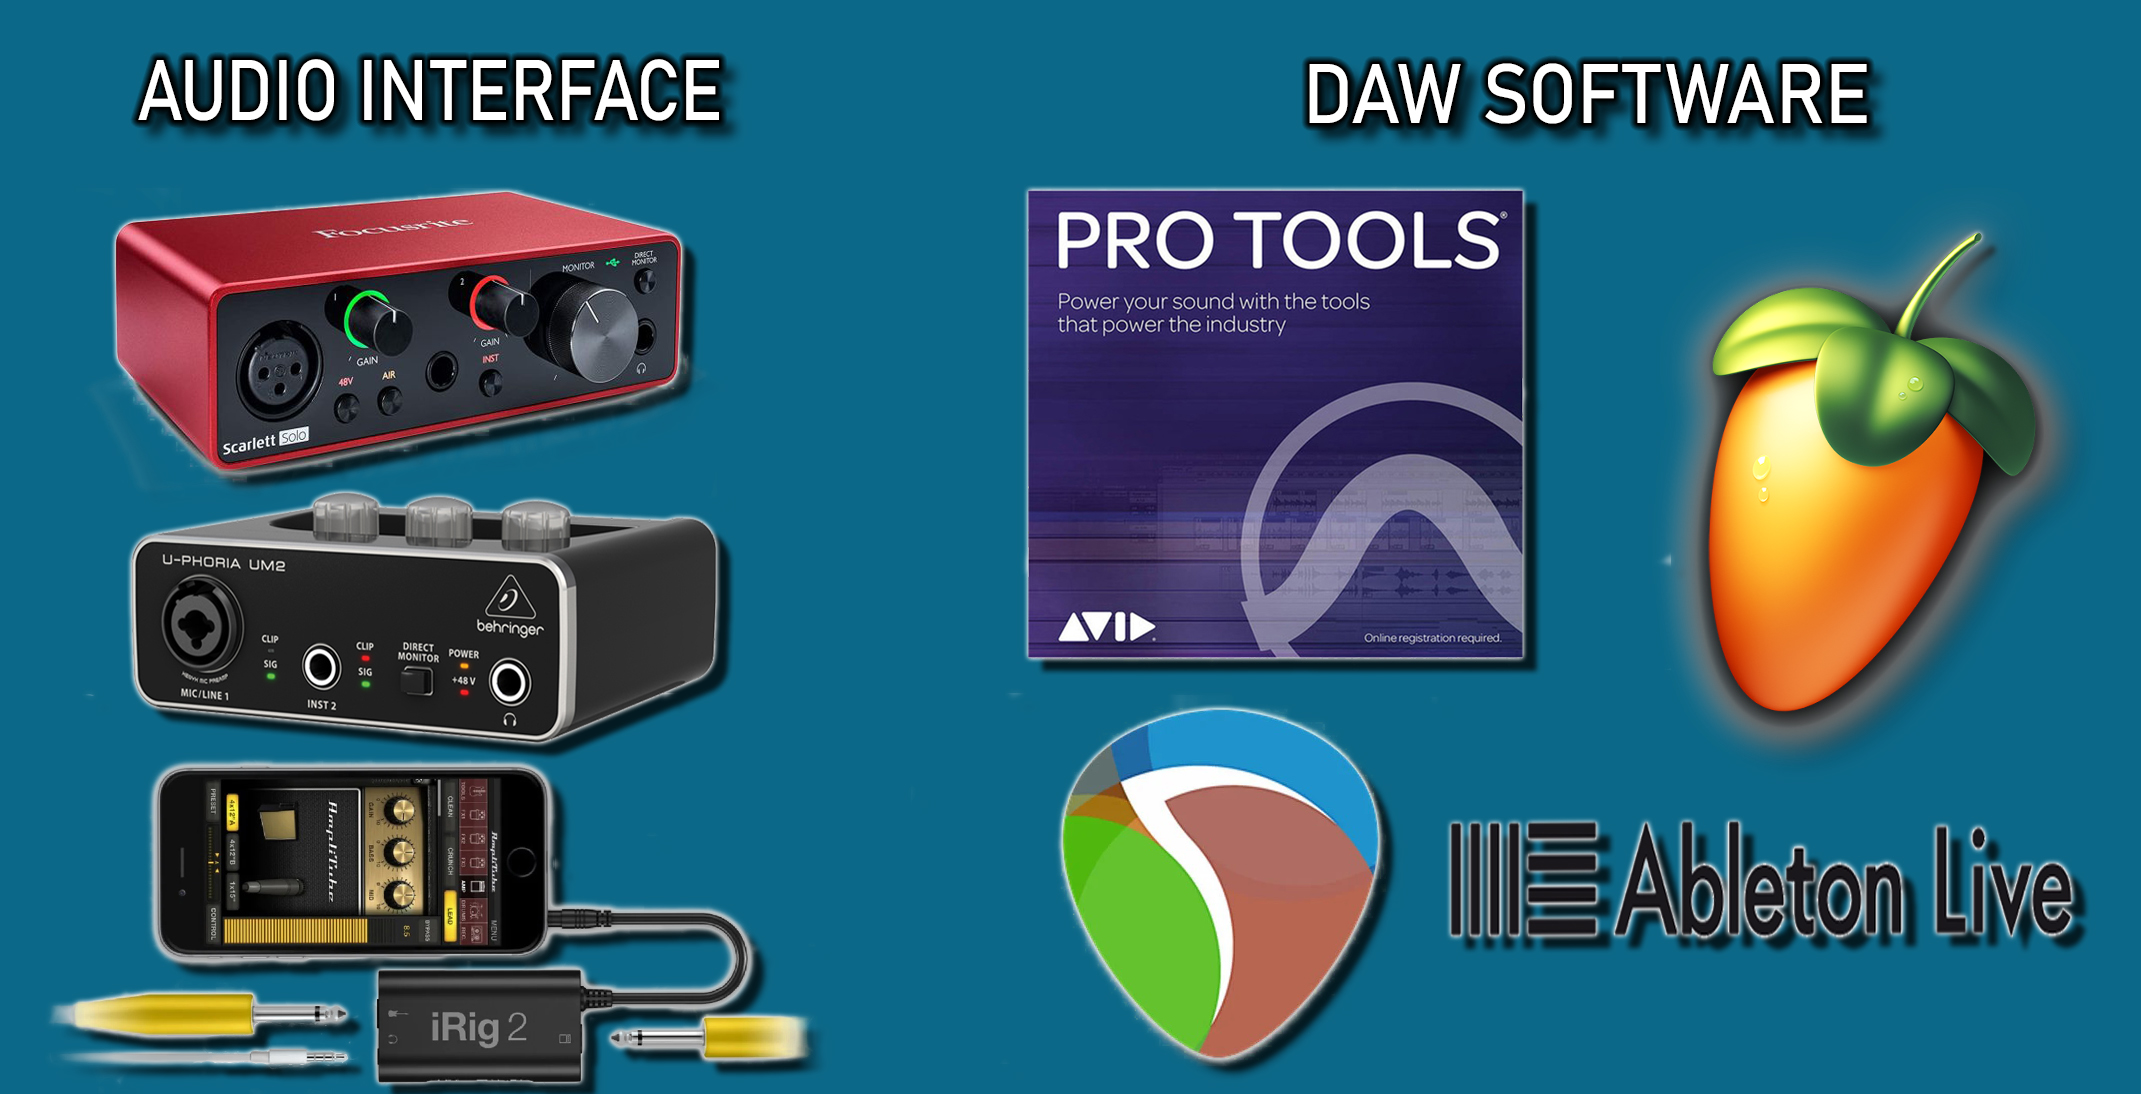 Audio Interface: Scarlet Solo, UM2, and iRig. DAWs:  Protools, Ableton Live, and FL Studio.